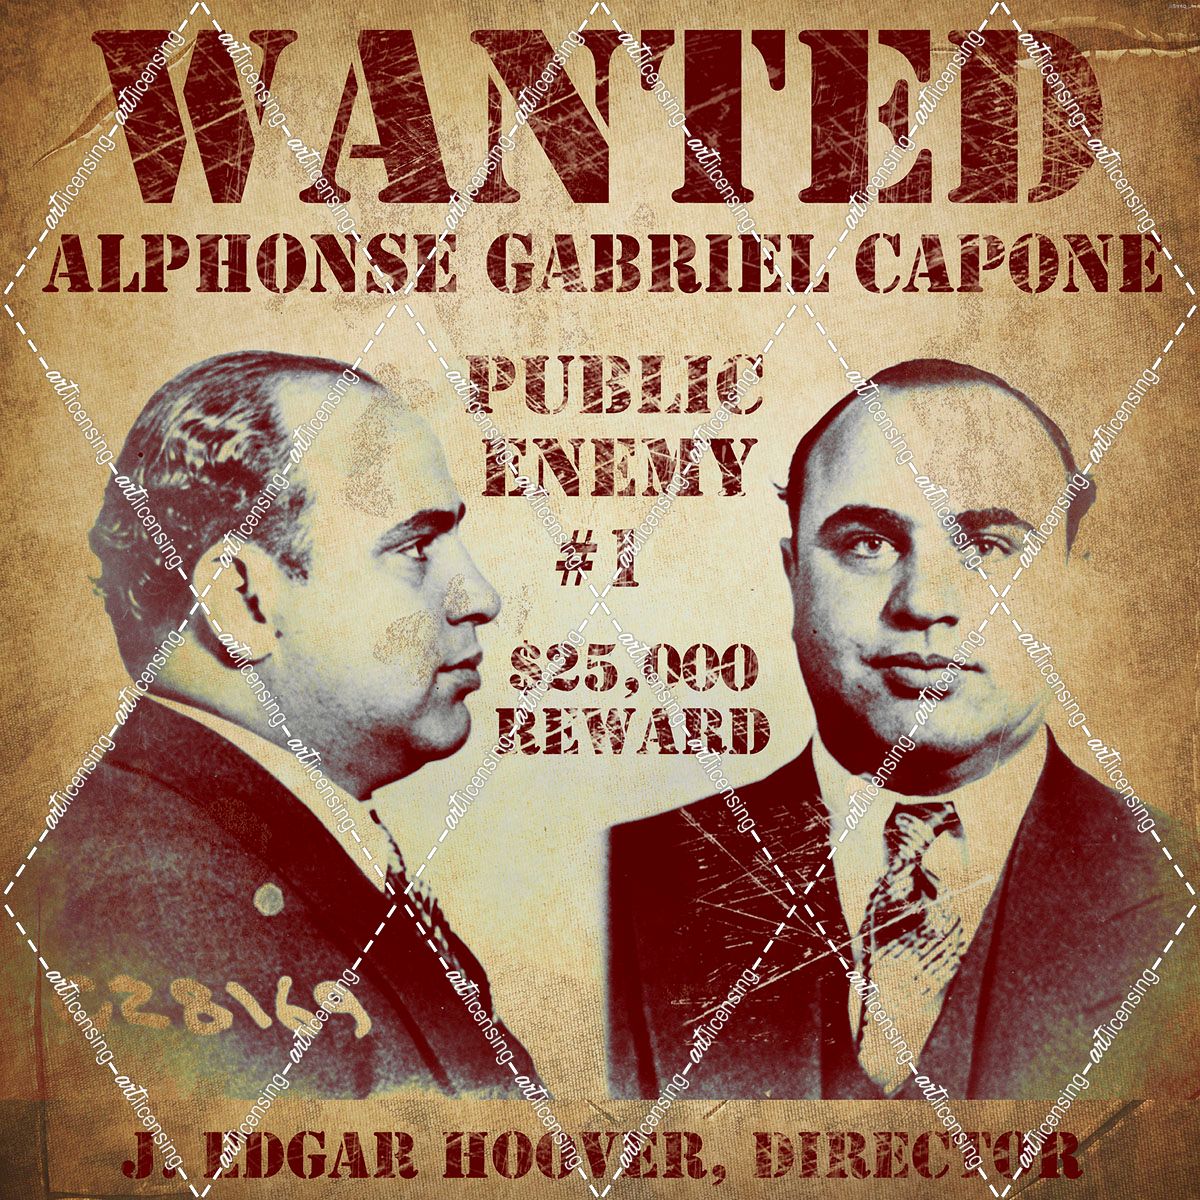 Al Capone Wanted Poster